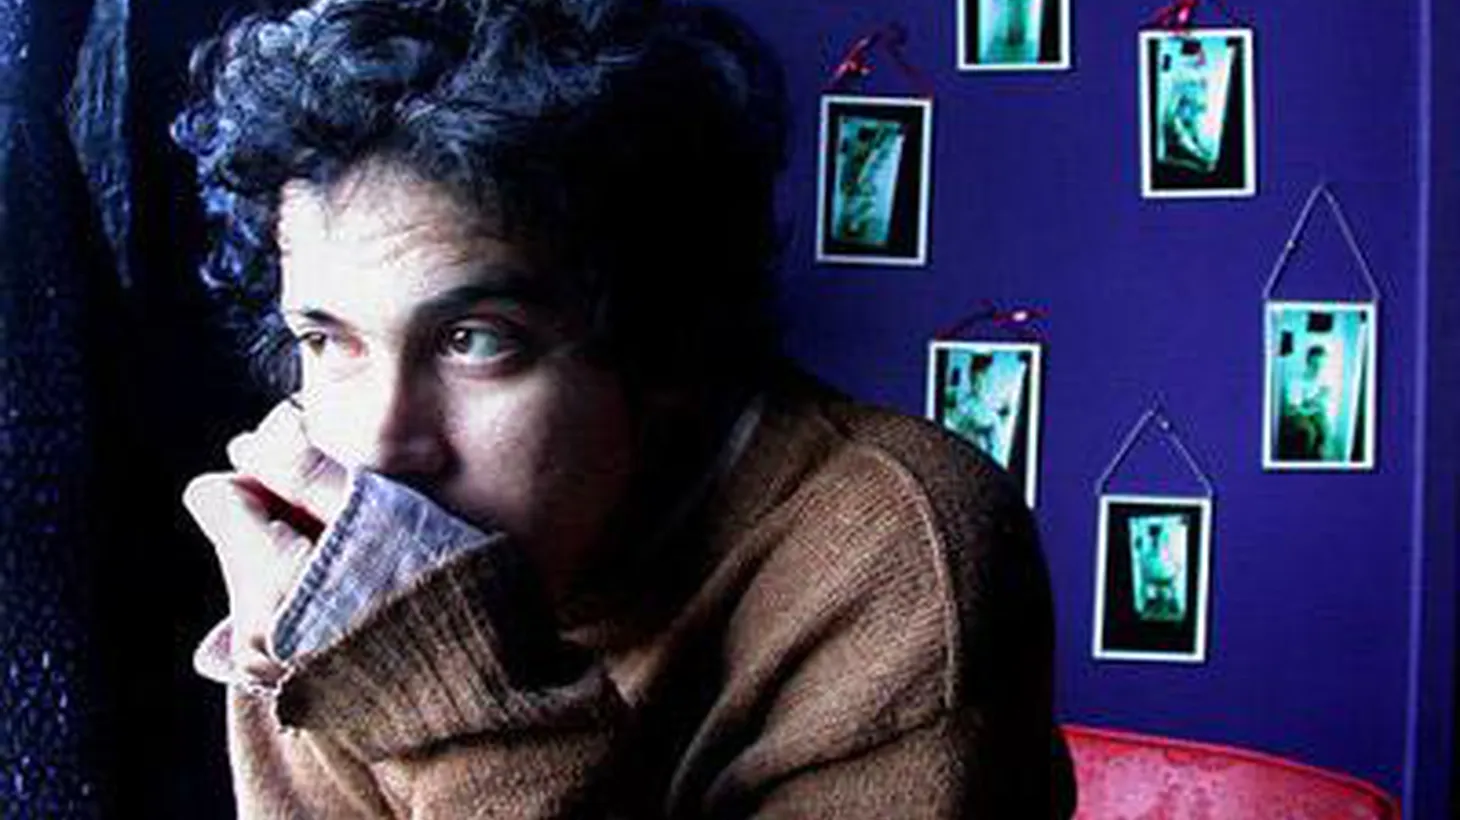 M. Ward joins us during the 10 o'clock hour of Morning Becomes Eclectic for a special Valentine's Day Guest DJ set.